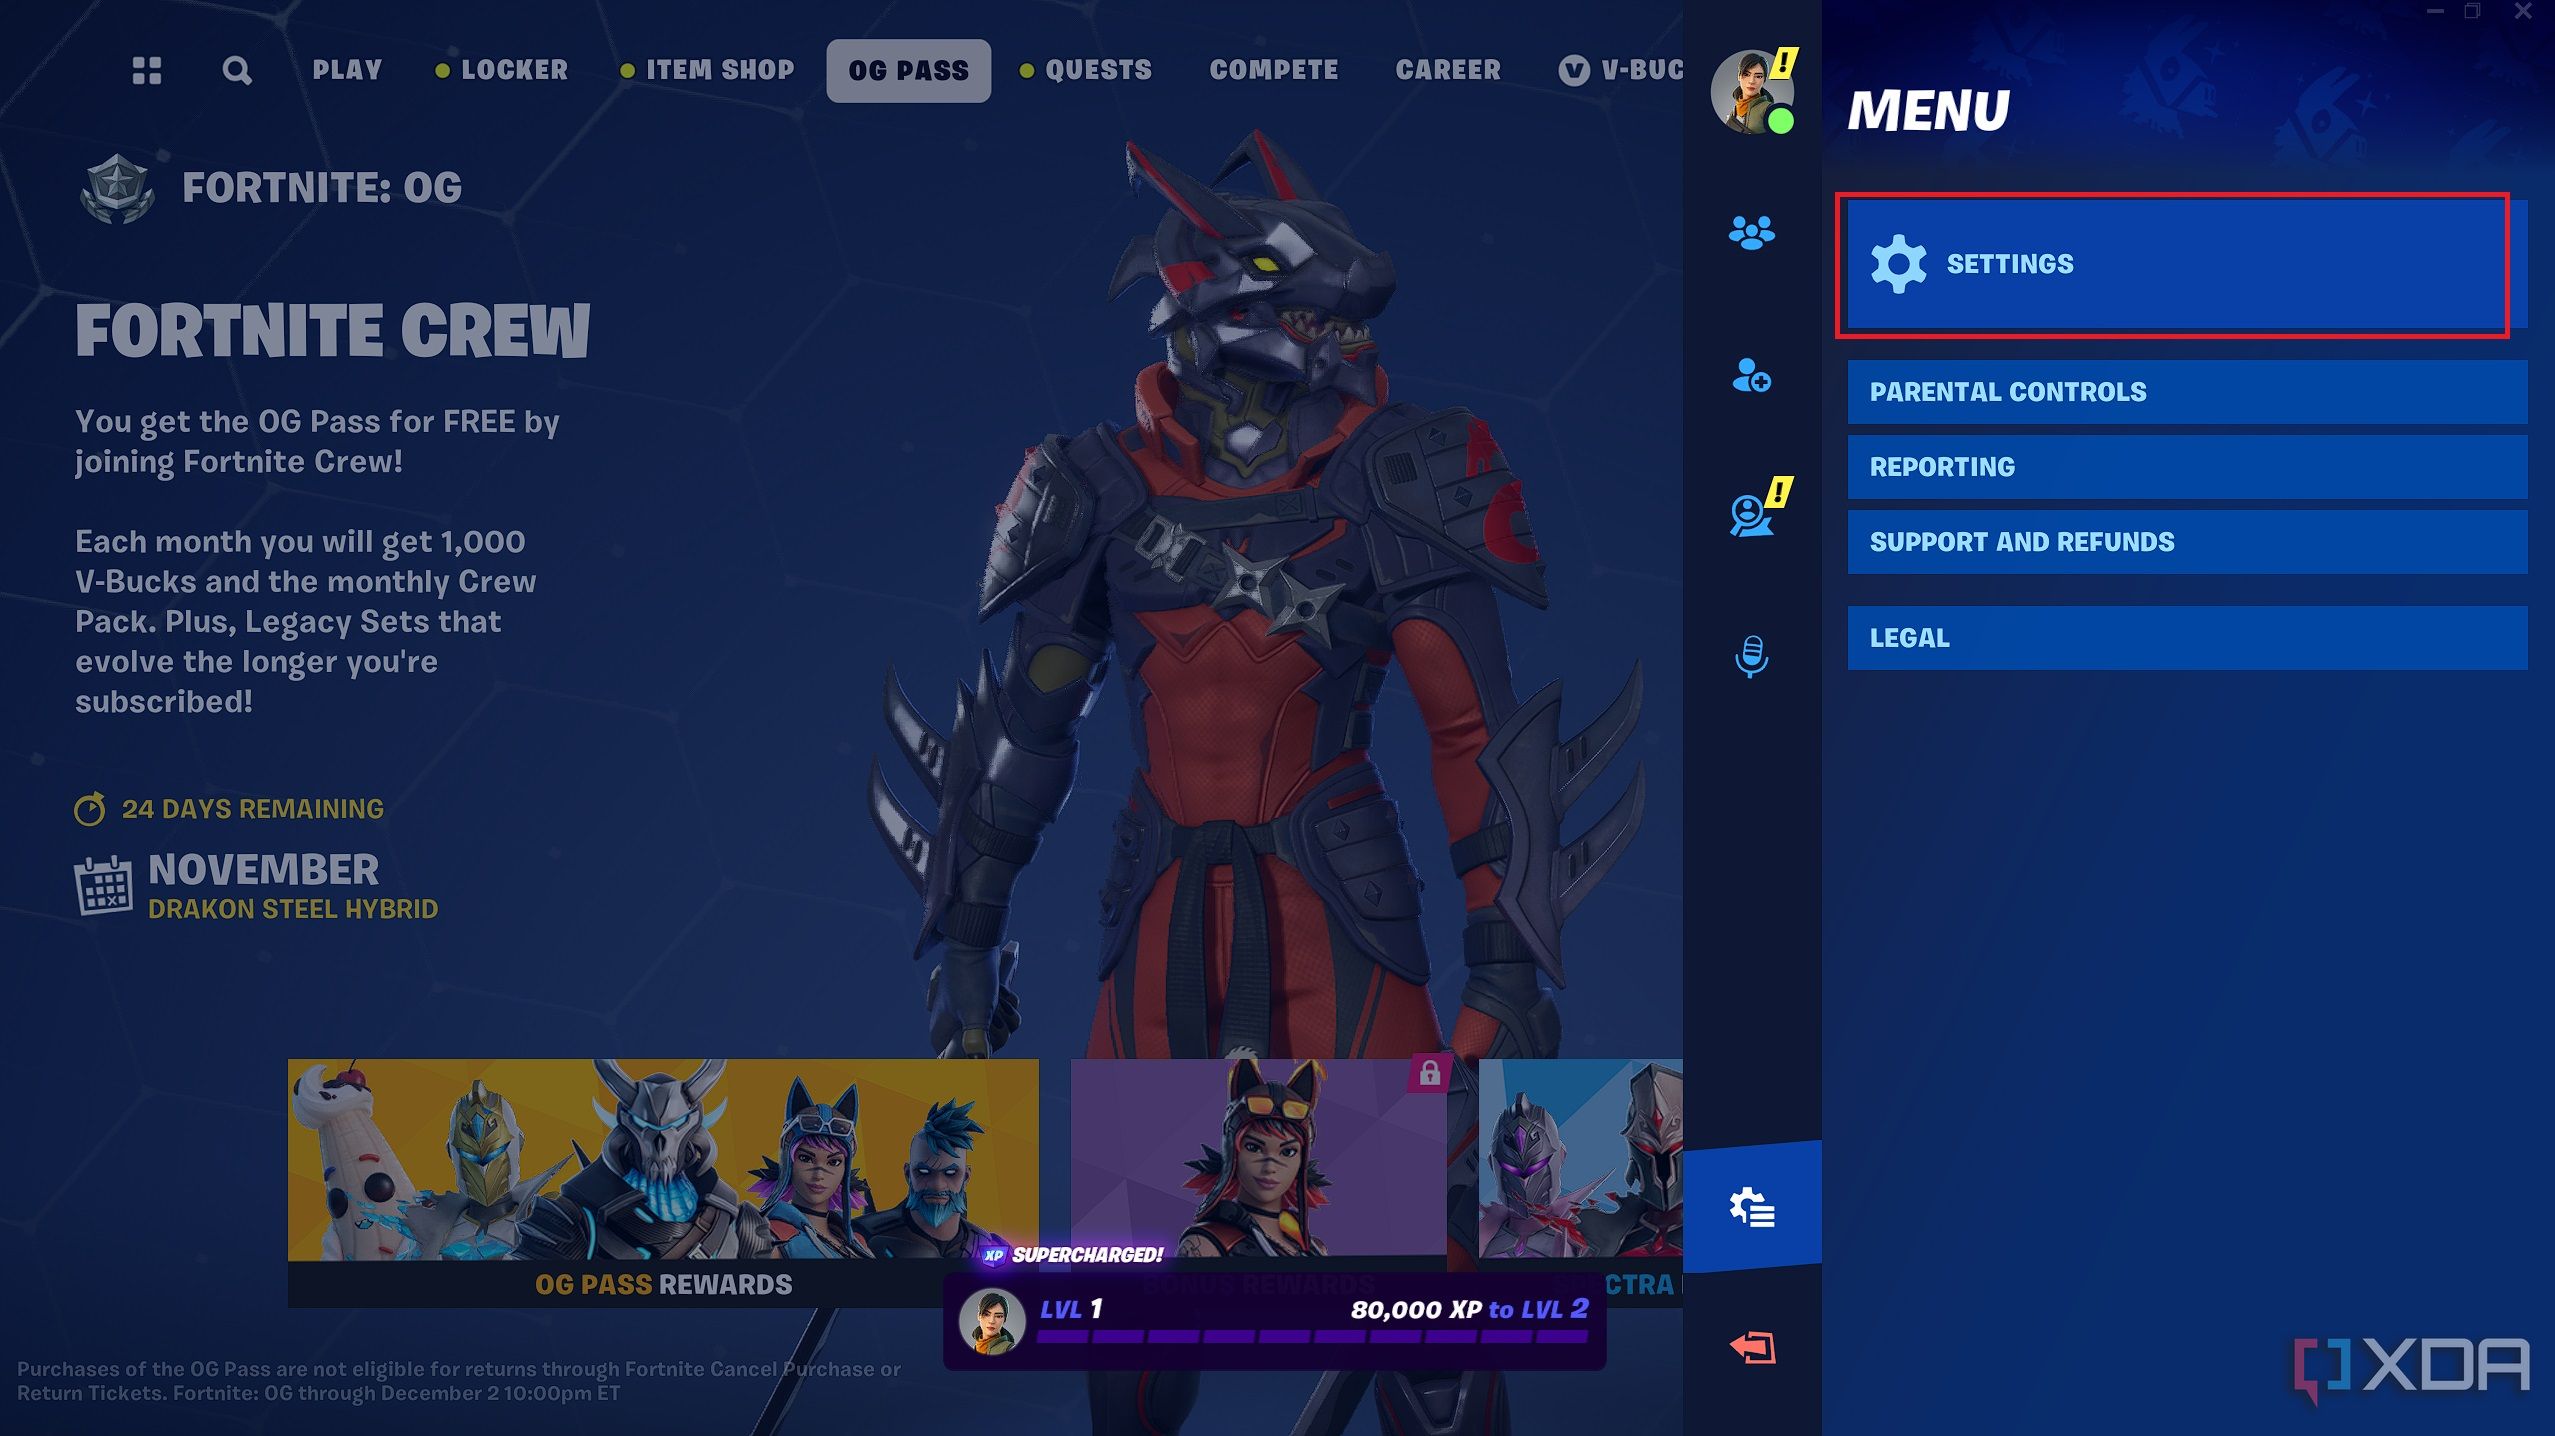 Fortnite with settings menu highlighted